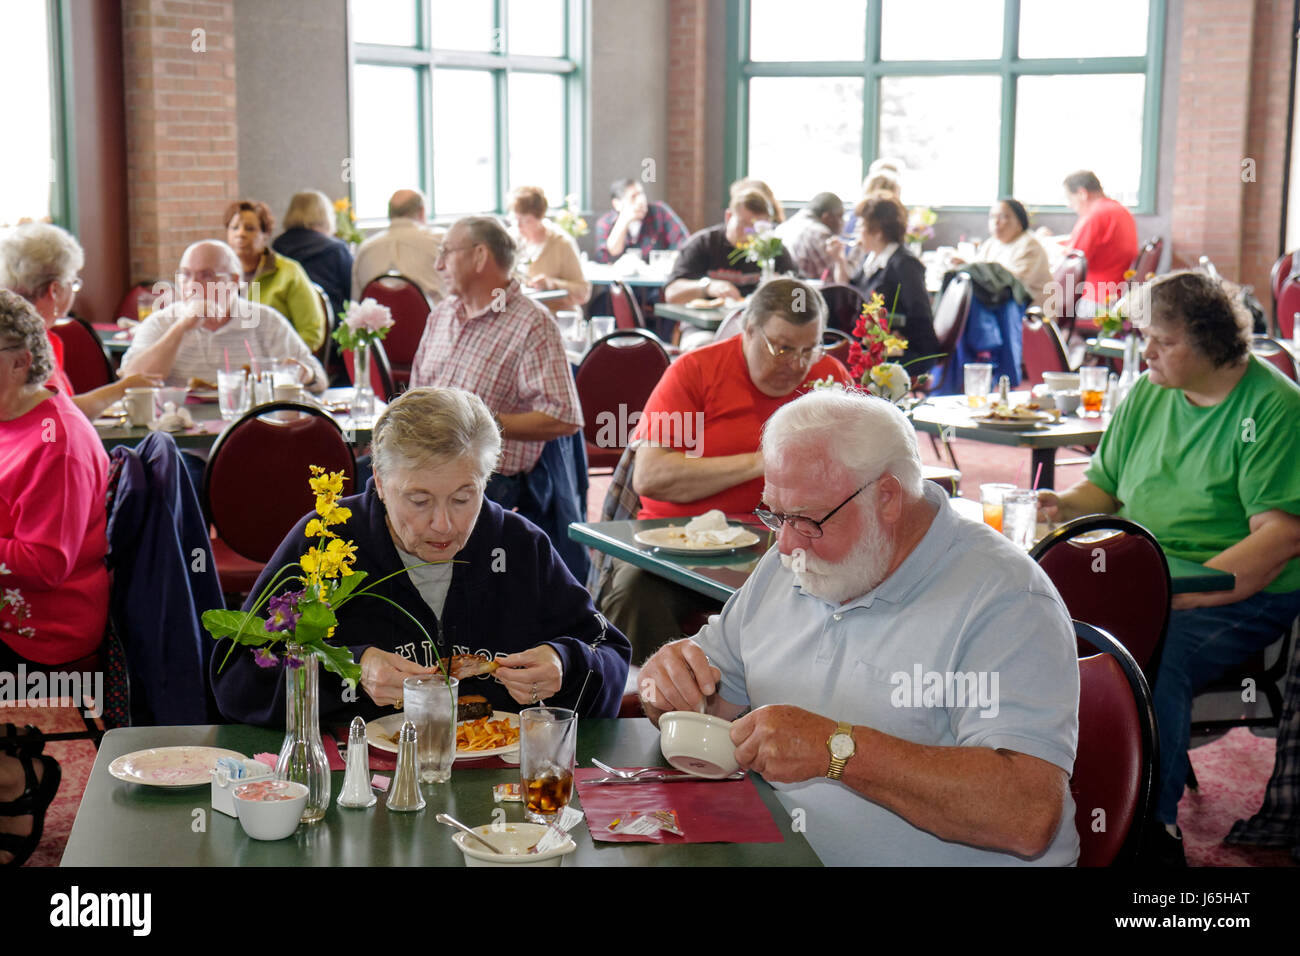 Michigan Saginaw Township,Horizon's Conference Center,buffet style,food,all you can eat,restaurant restaurants food dining cafe cafes,food,dining,man Stock Photo